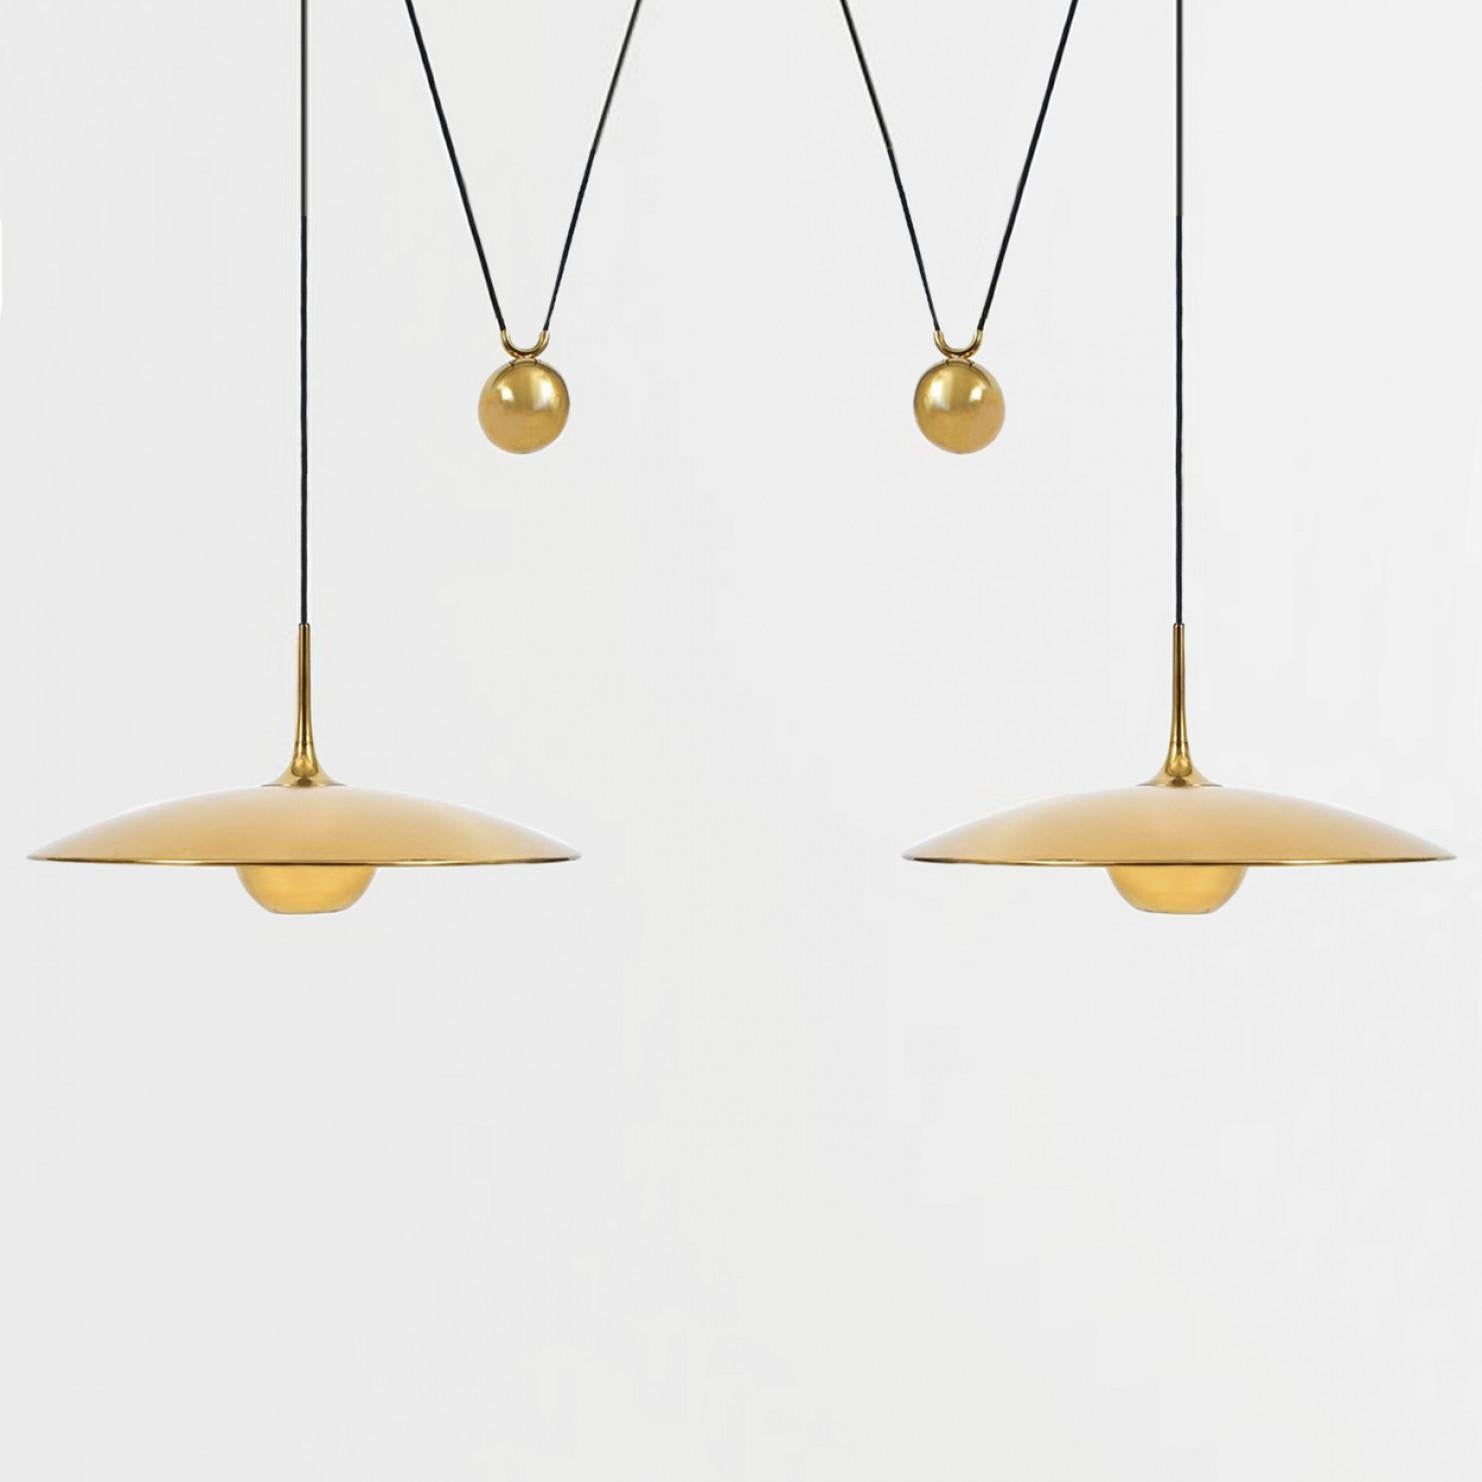 Modern Onos 55 Double Pull Brass Pendant Lamp by Florian Schulz, Germany For Sale